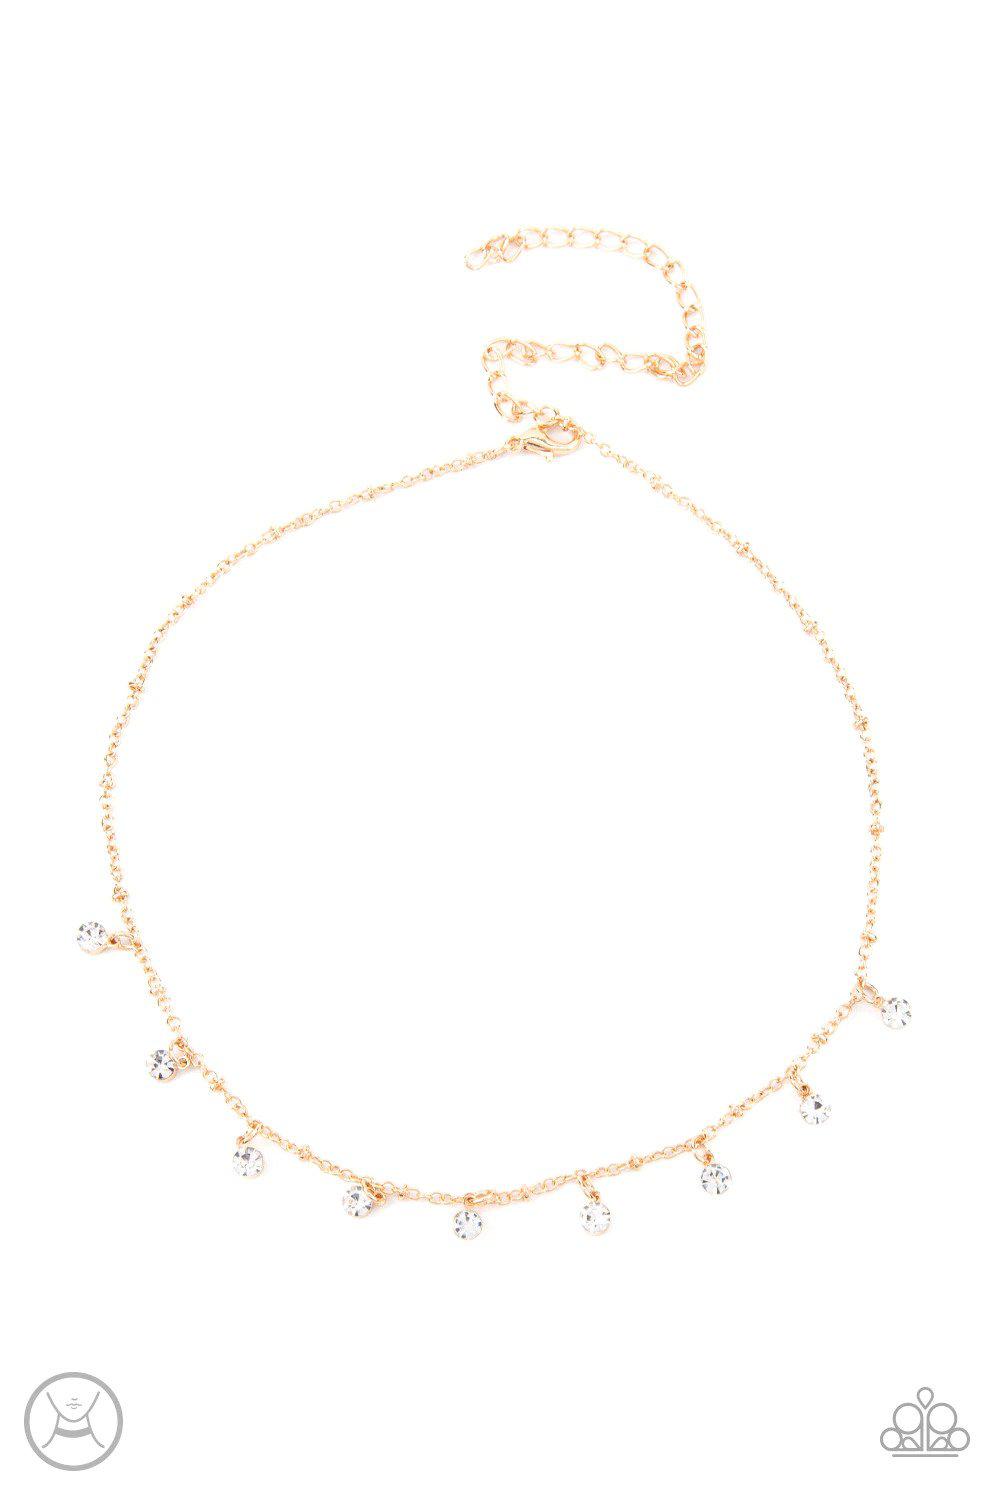 Dainty Diva Gold Necklace - Paparazzi Accessories- lightbox - CarasShop.com - $5 Jewelry by Cara Jewels